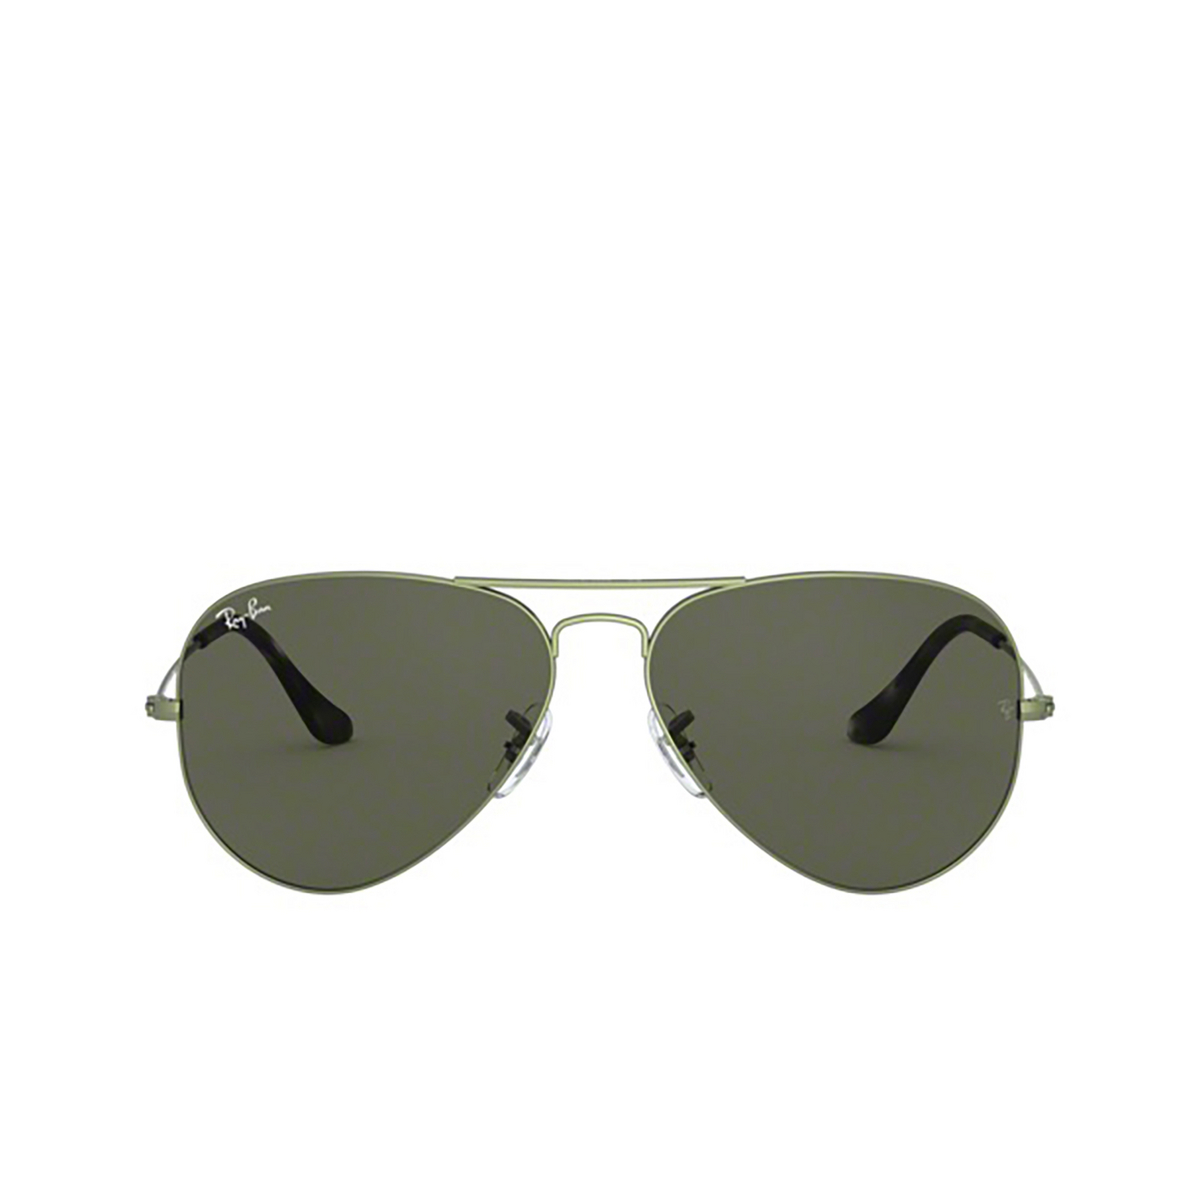 Ray-Ban AVIATOR LARGE METAL Sunglasses 919131 Sand Transparent Green - front view